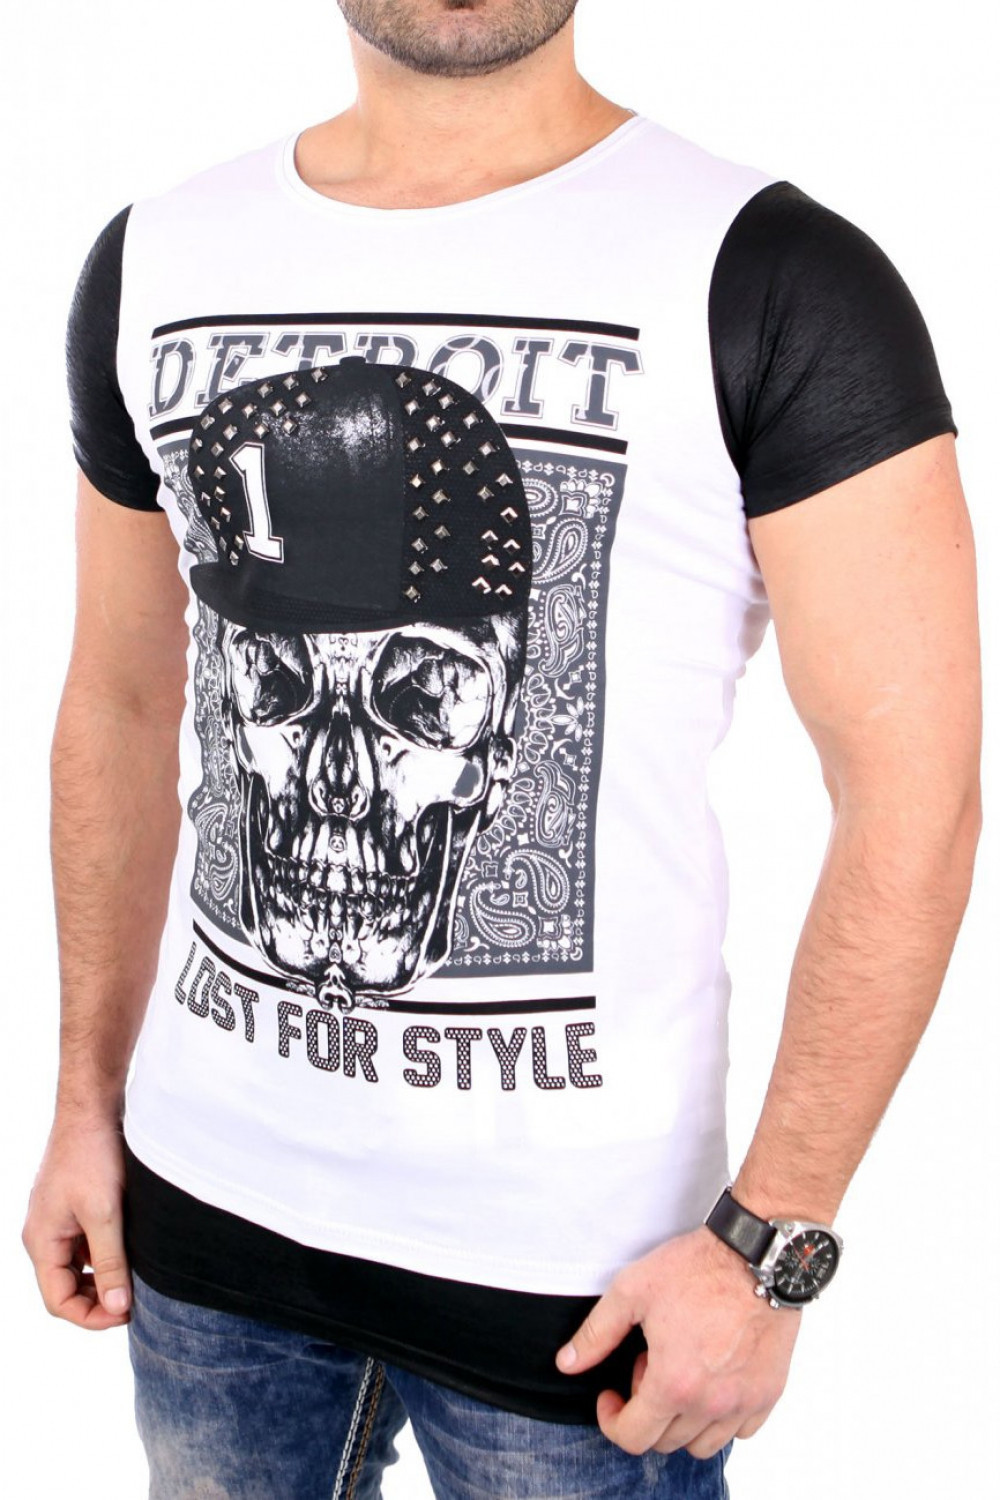 ~T-shirt model 61308 YourNewStyle S